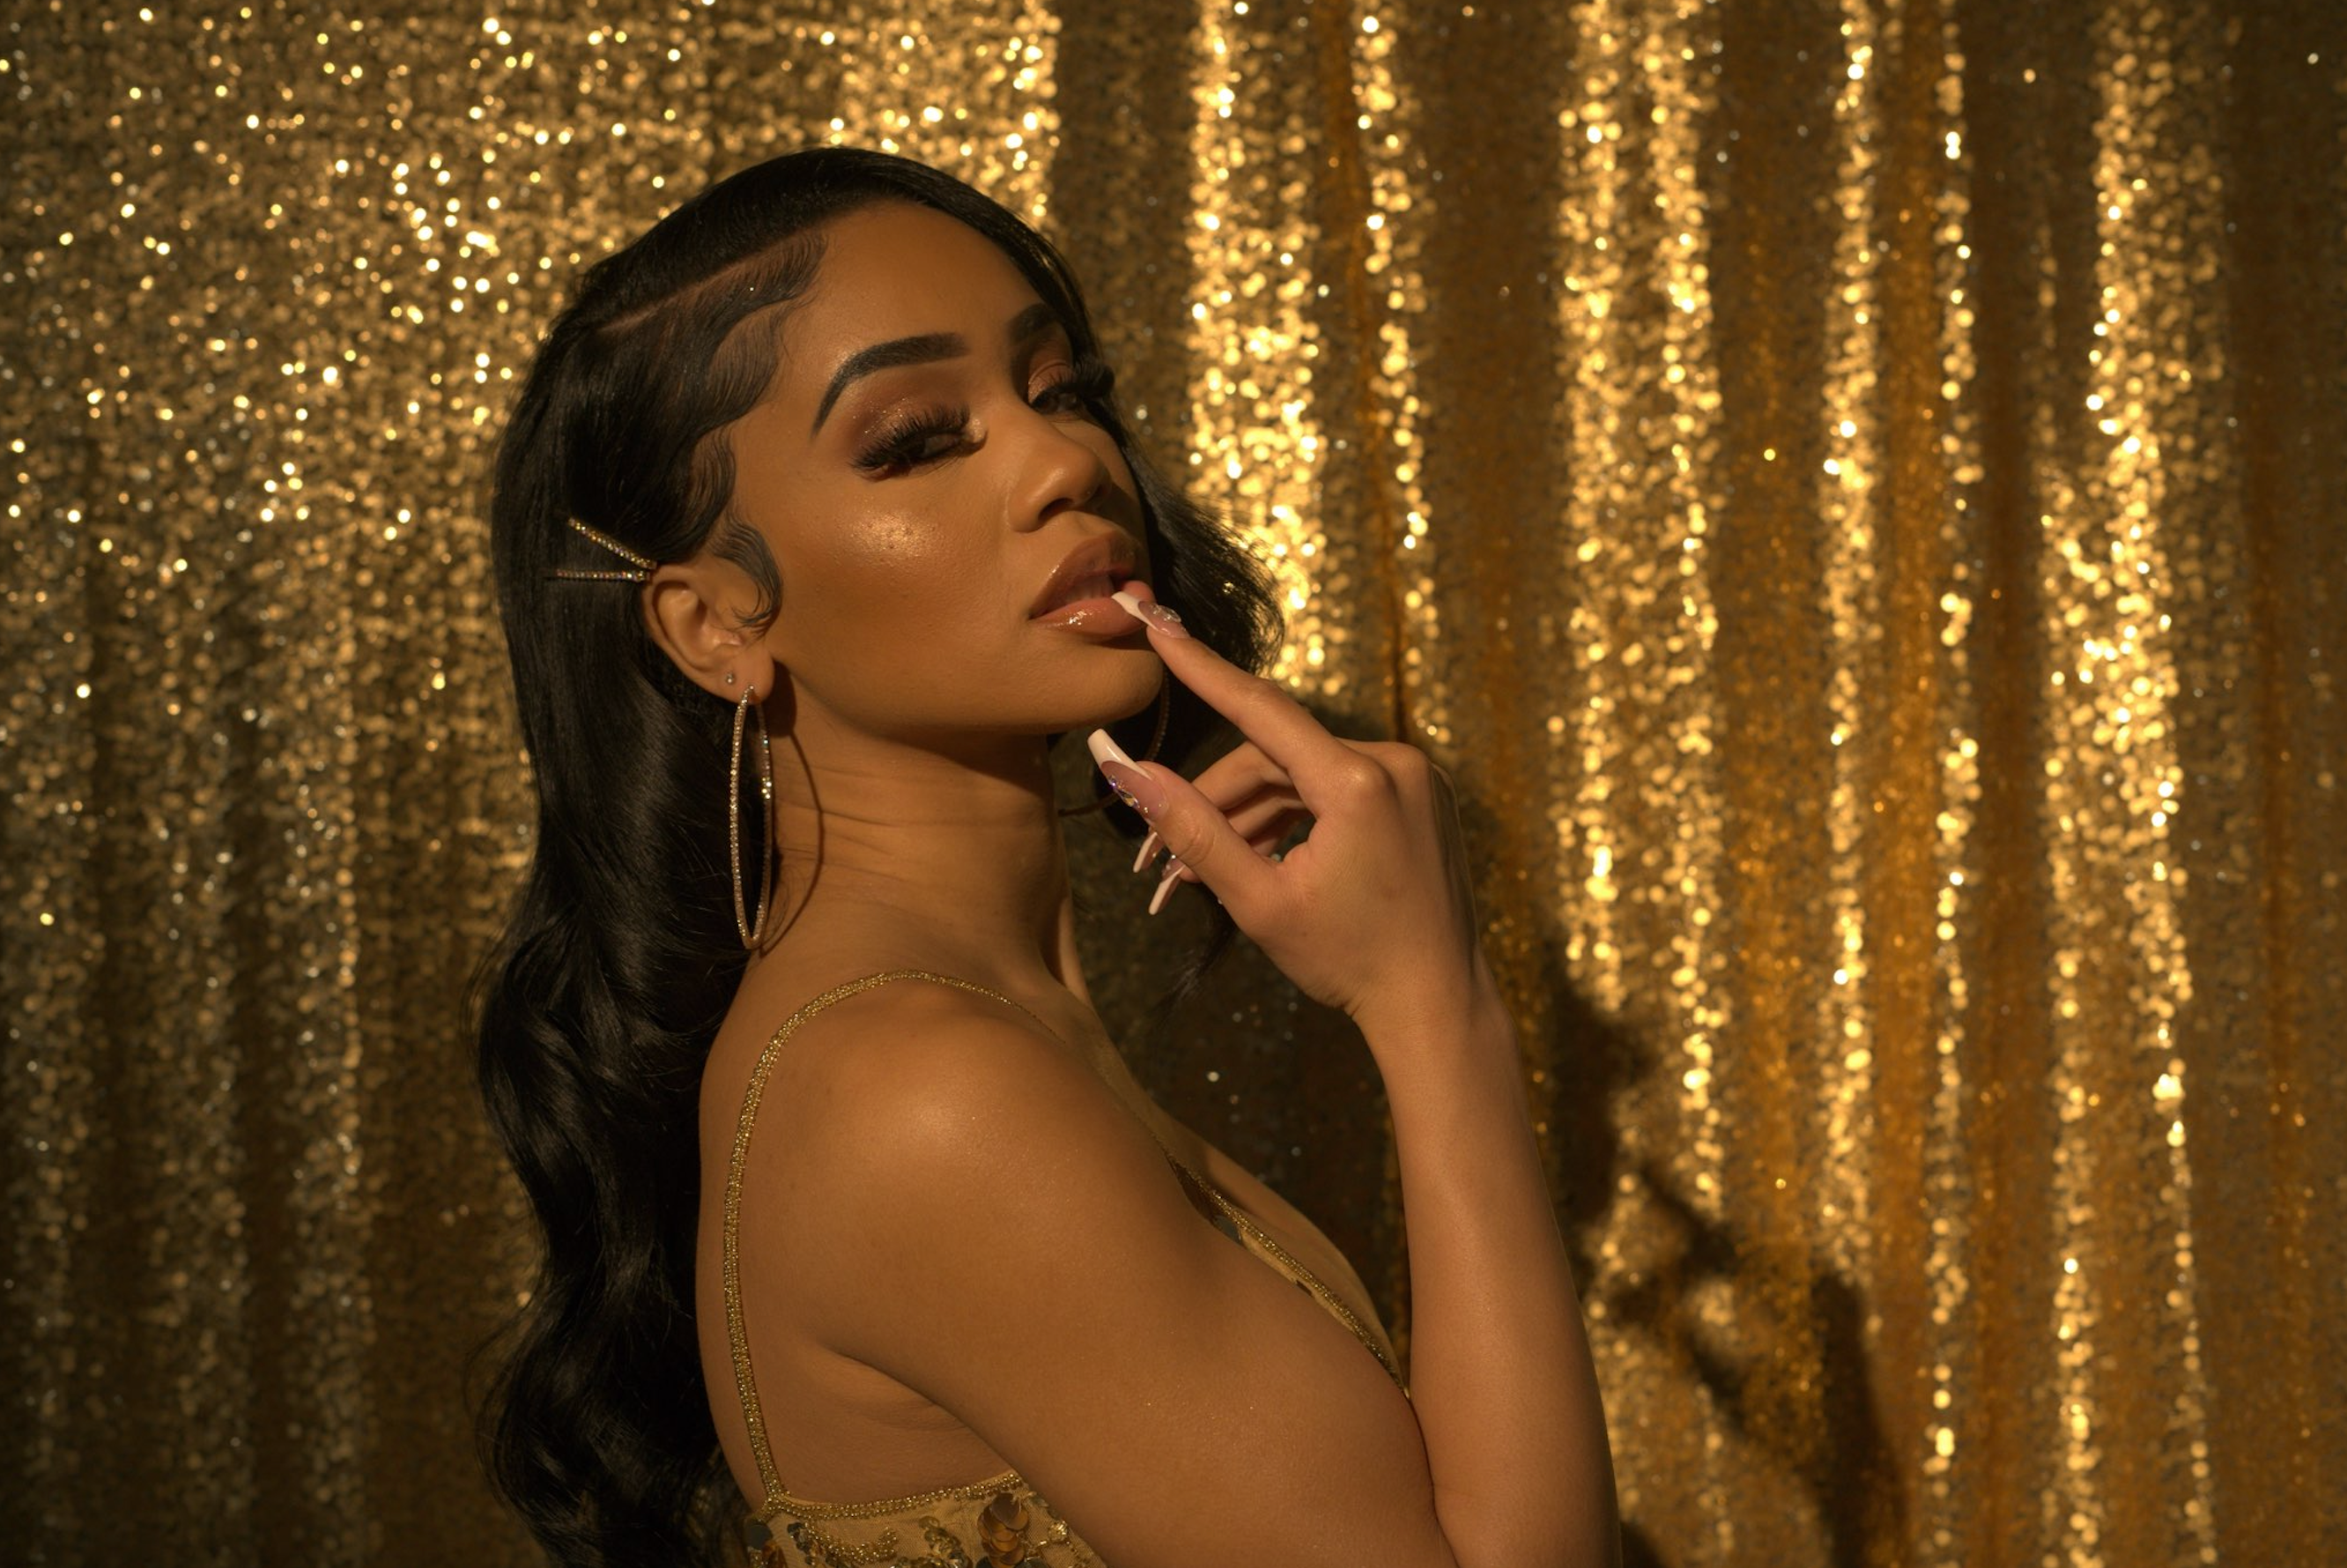 Saweetie Gives Us The Scoop On Her Single, 'Back to the Streets'